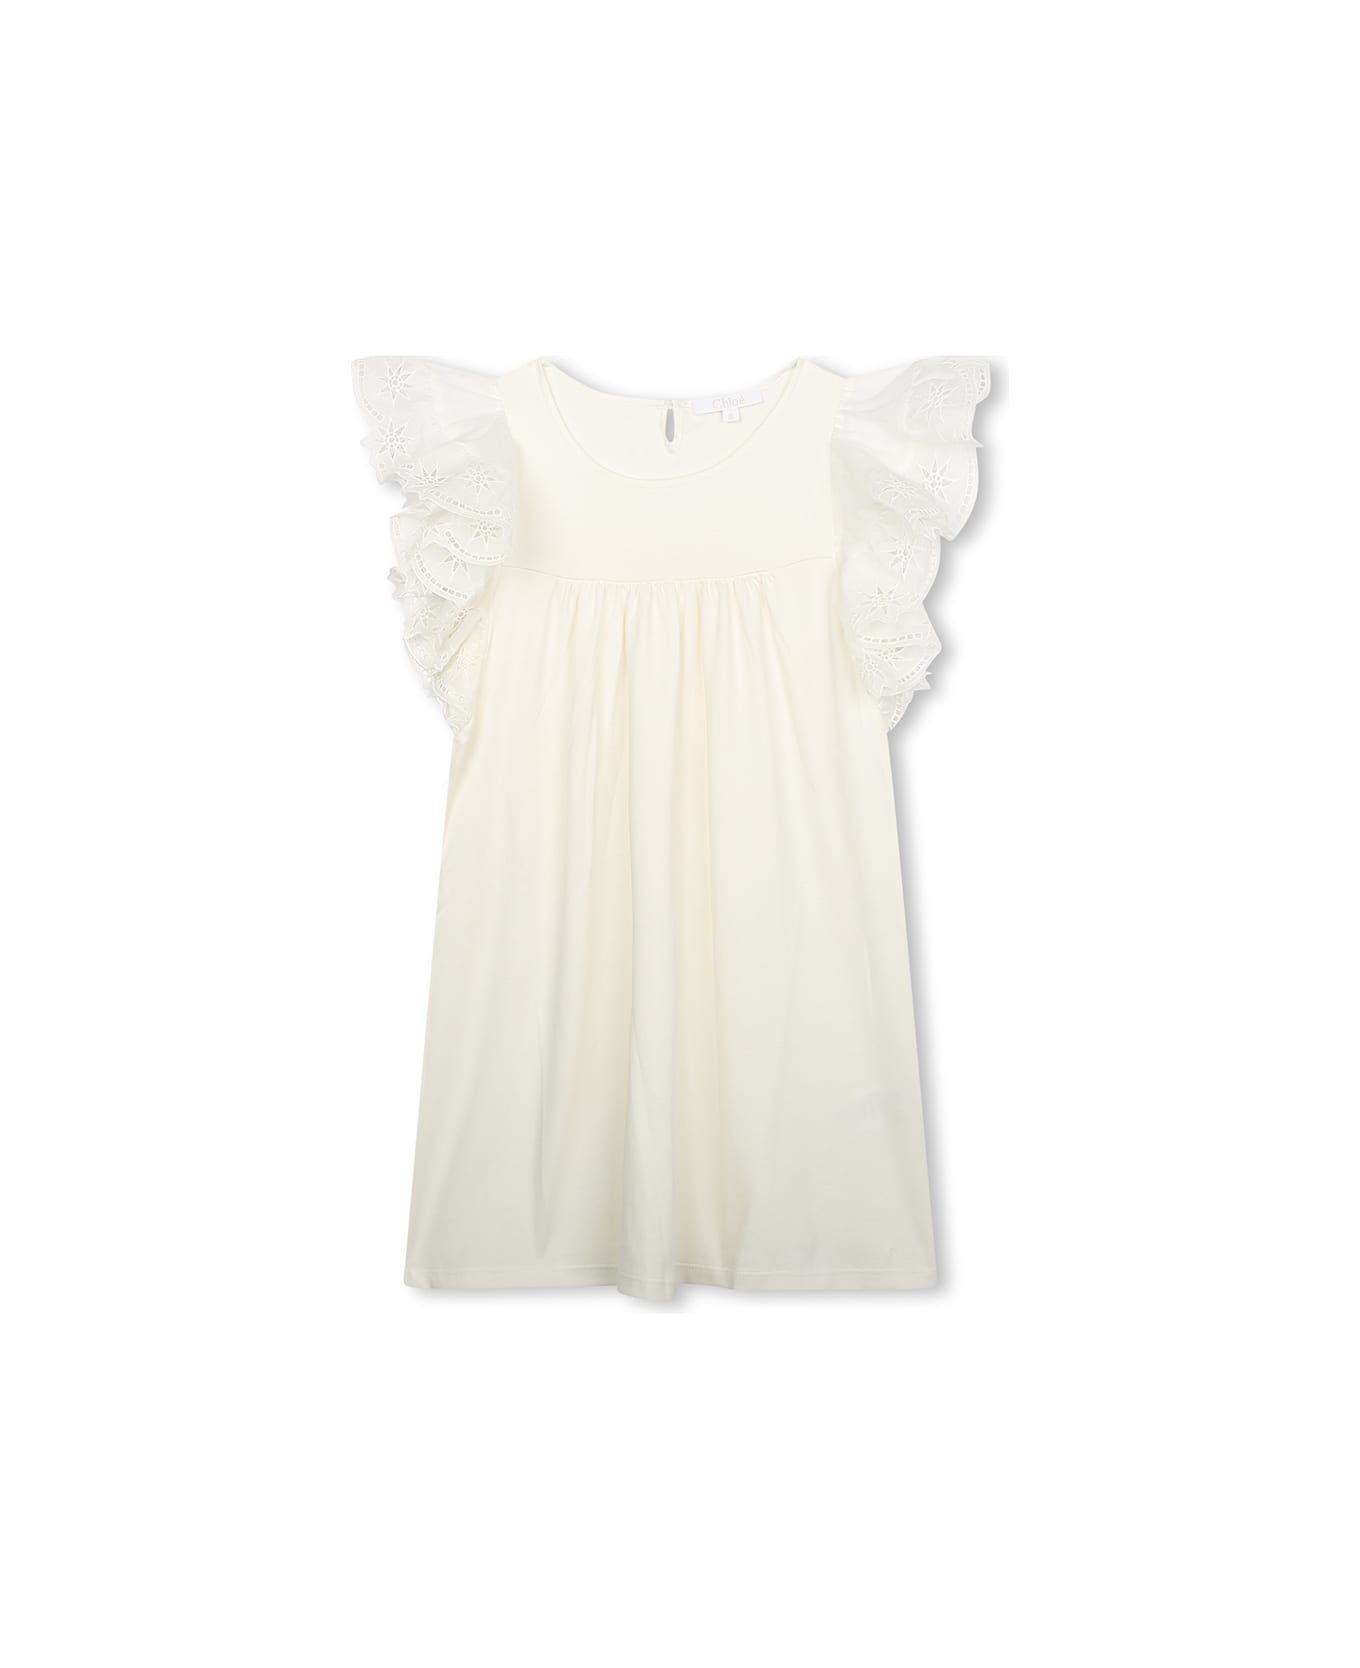 Chloé White Dress With Embroidered Ruffles - White ワンピース＆ドレス